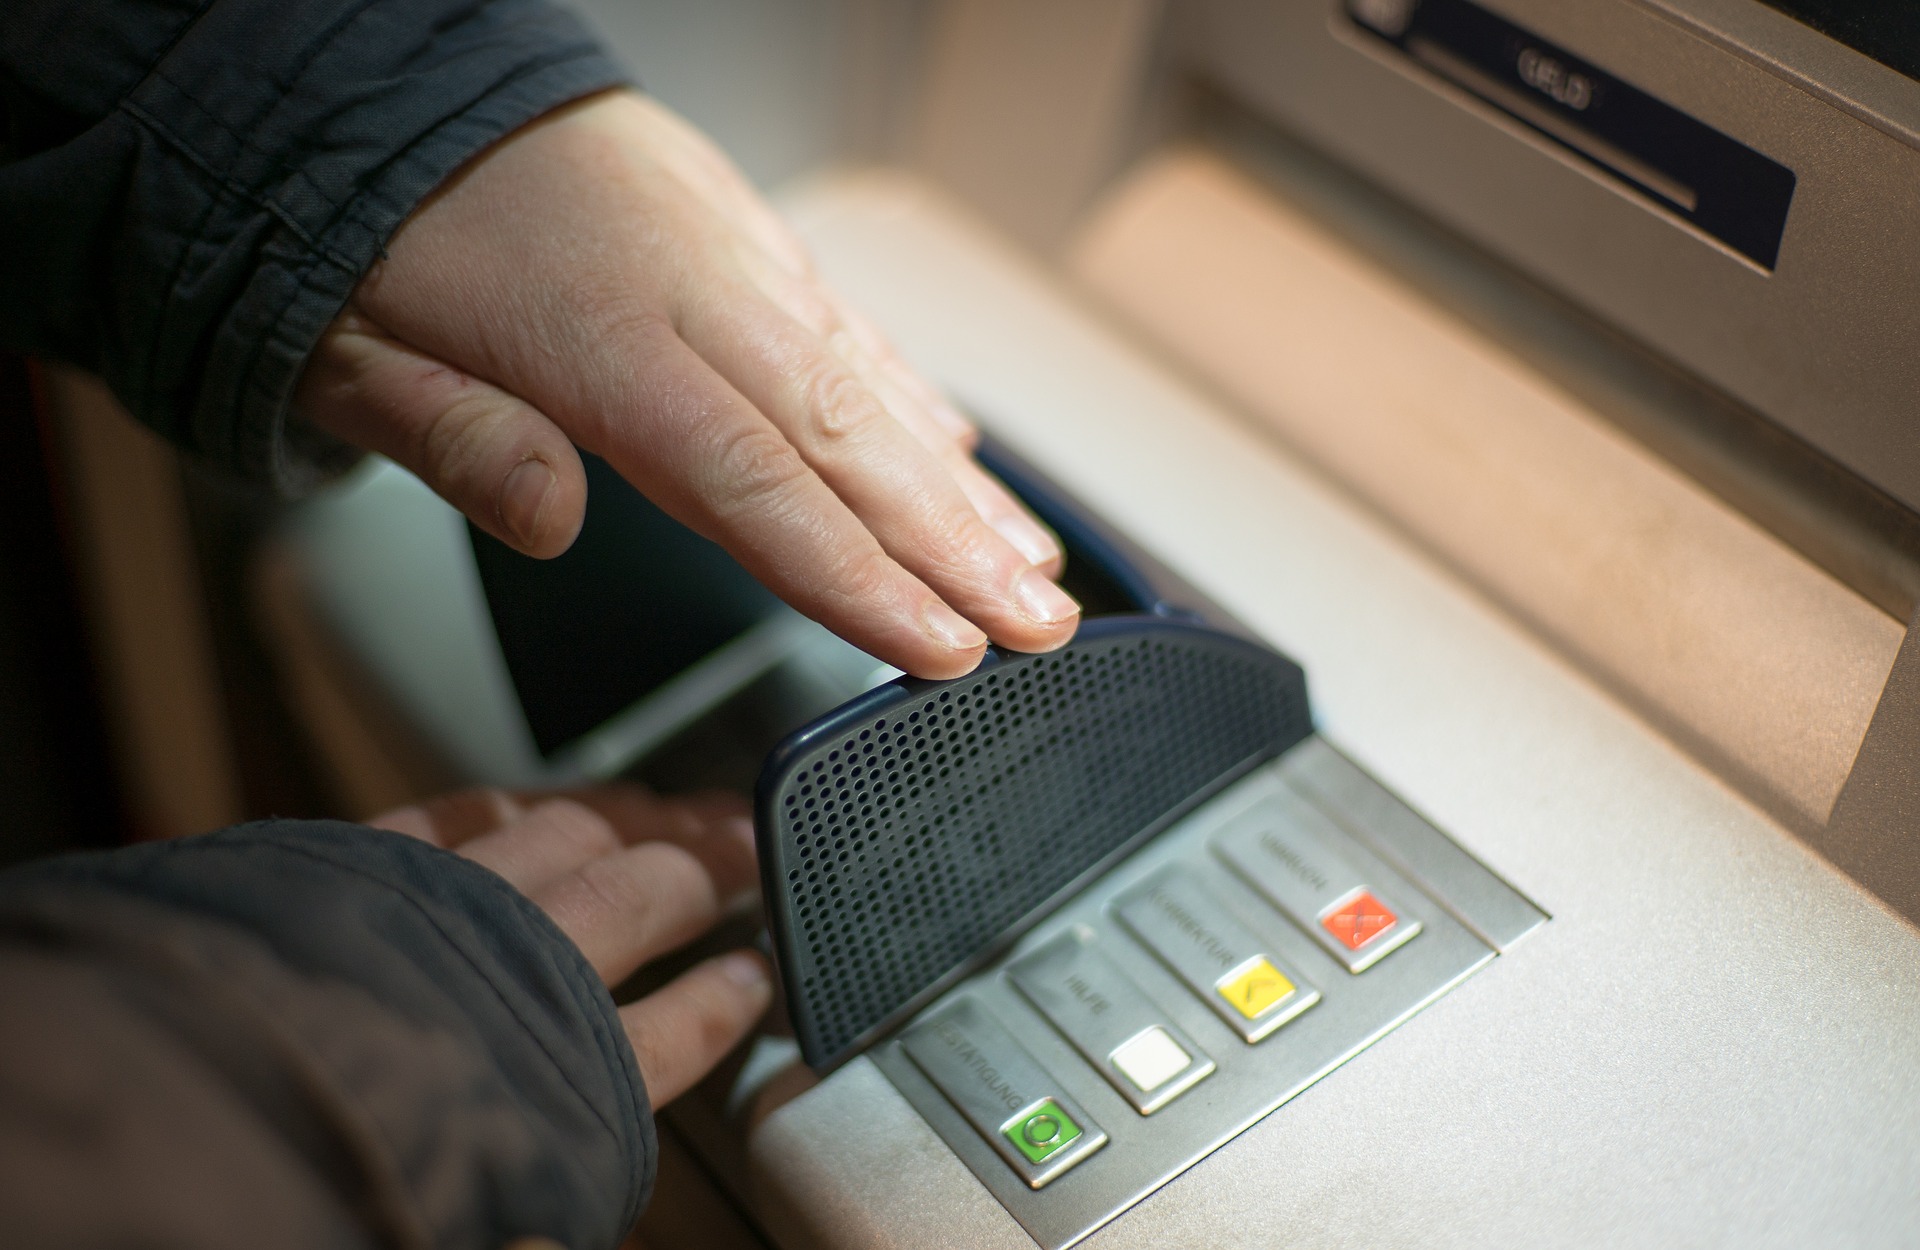 Major security vulnerabilities could affect medical facilities, ATMs and industrial facilities.